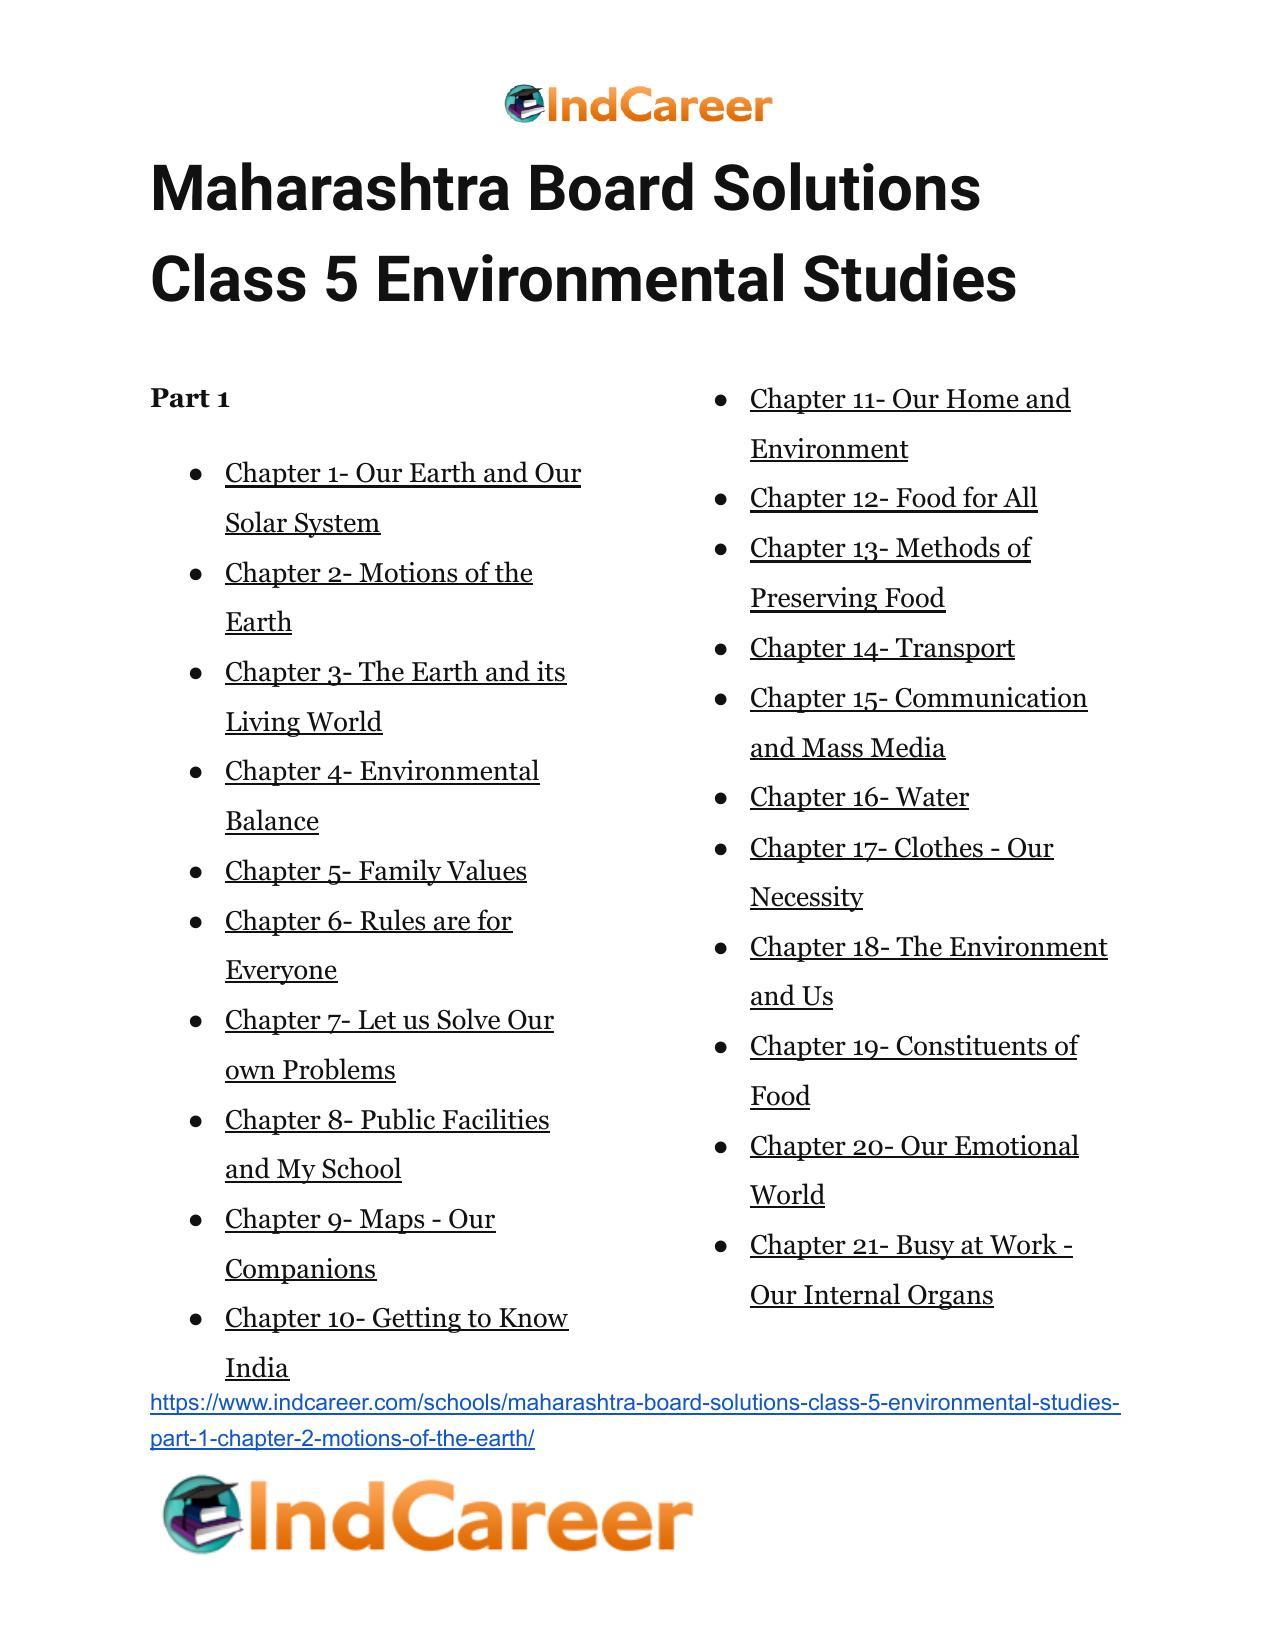 Maharashtra Board Solutions Class 5-Environmental Studies (Part 1): Chapter 2- Motions of the Earth - Page 22